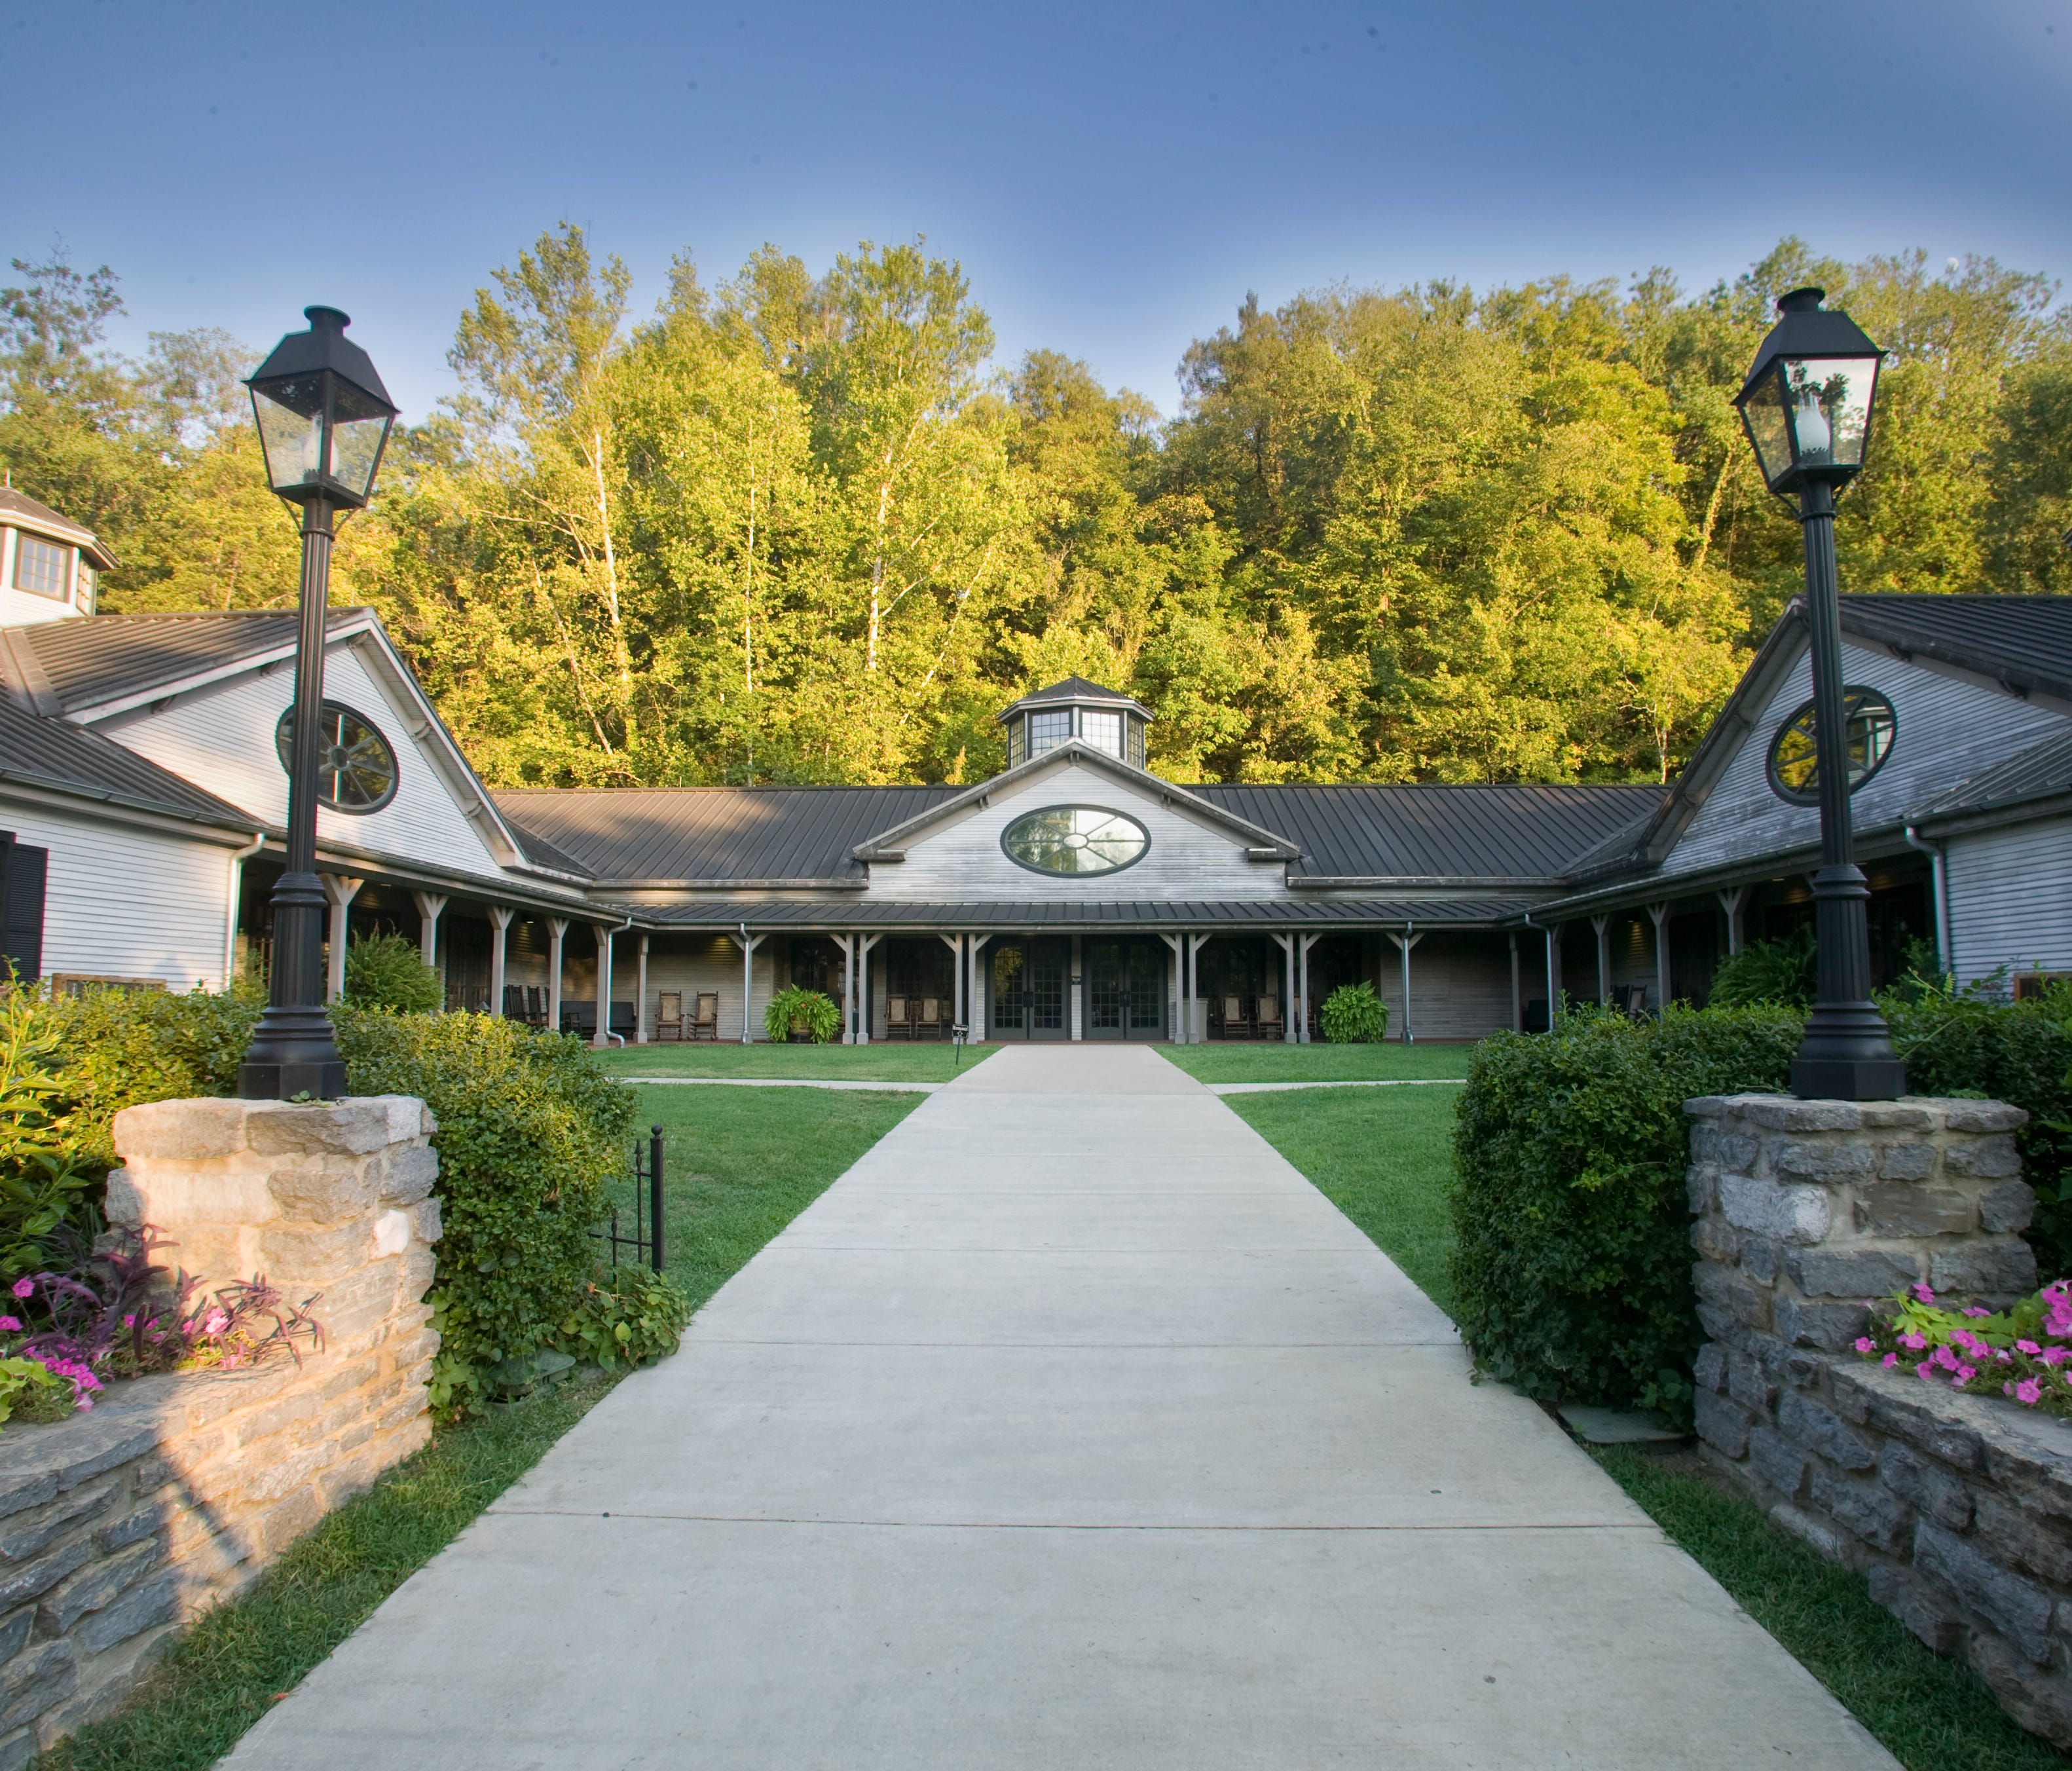 The Jack Daniel's visitor center is open from 9 a.m. to 4:30 p.m. daily, excluding major holidays. More than 200,000 people a year visit the distillery, which celebrated 150 years in 2016.